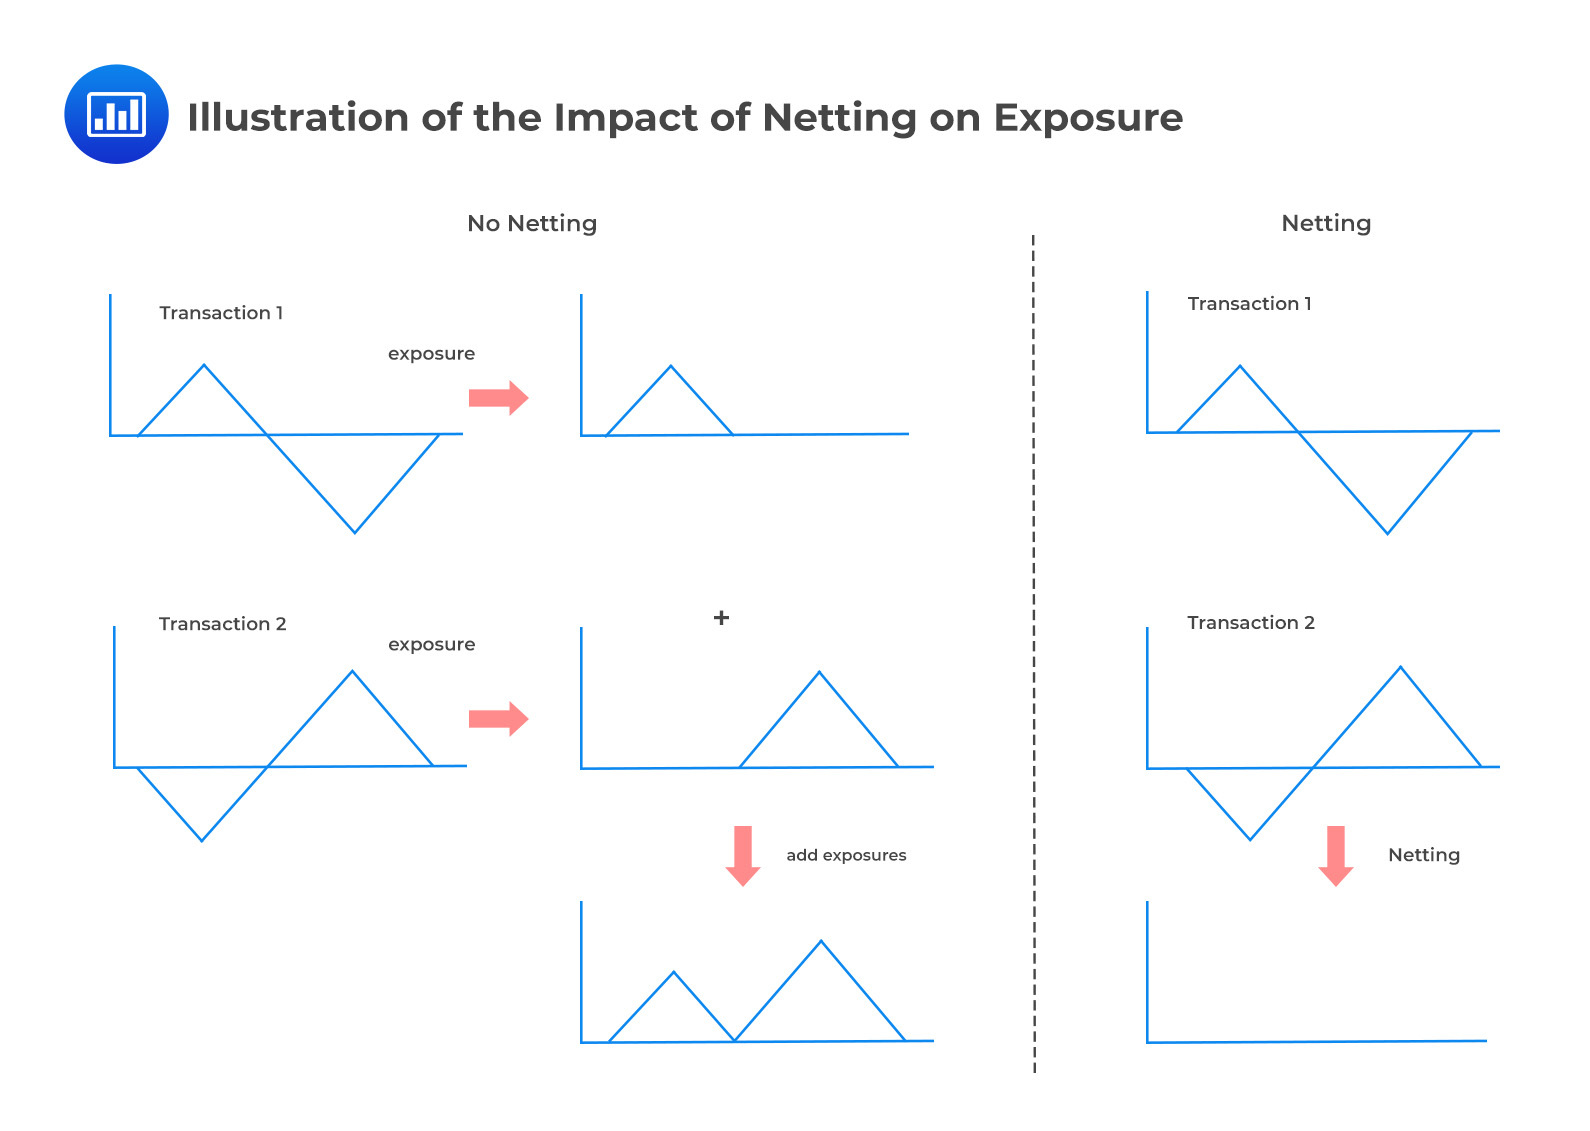 Illustration of the impacts of netting on exposure